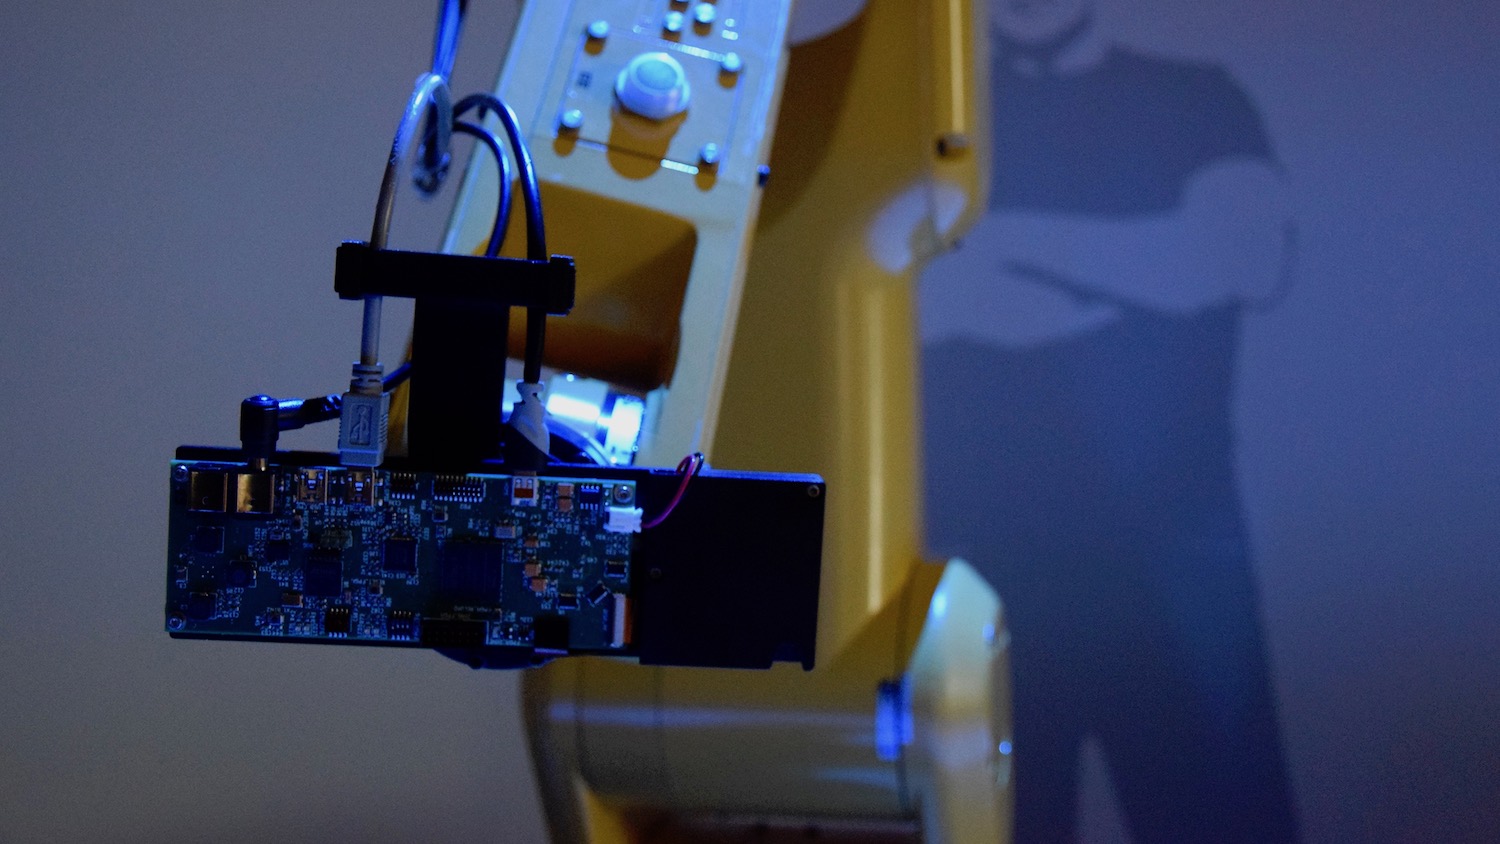 Close-up of laser projector attached to the robot arm.